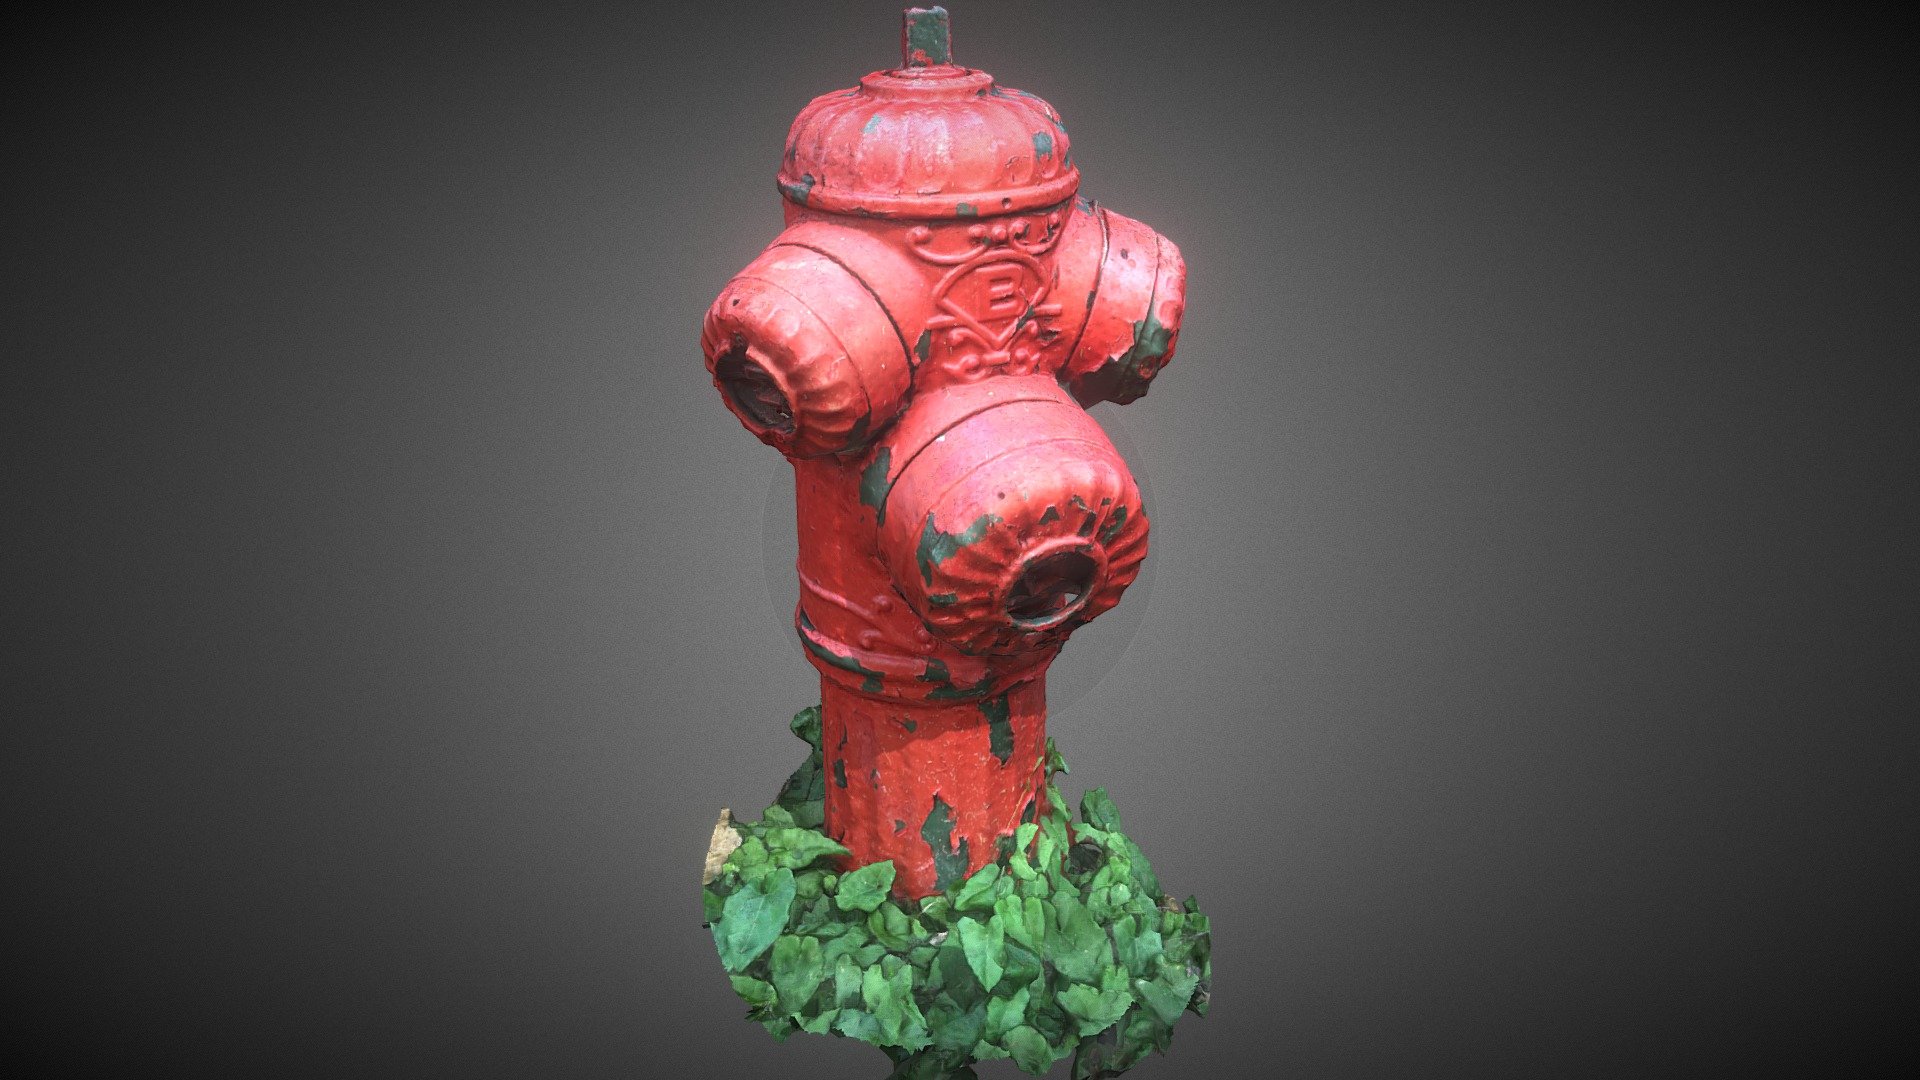 Red Fire Hydrant (old) - Scan